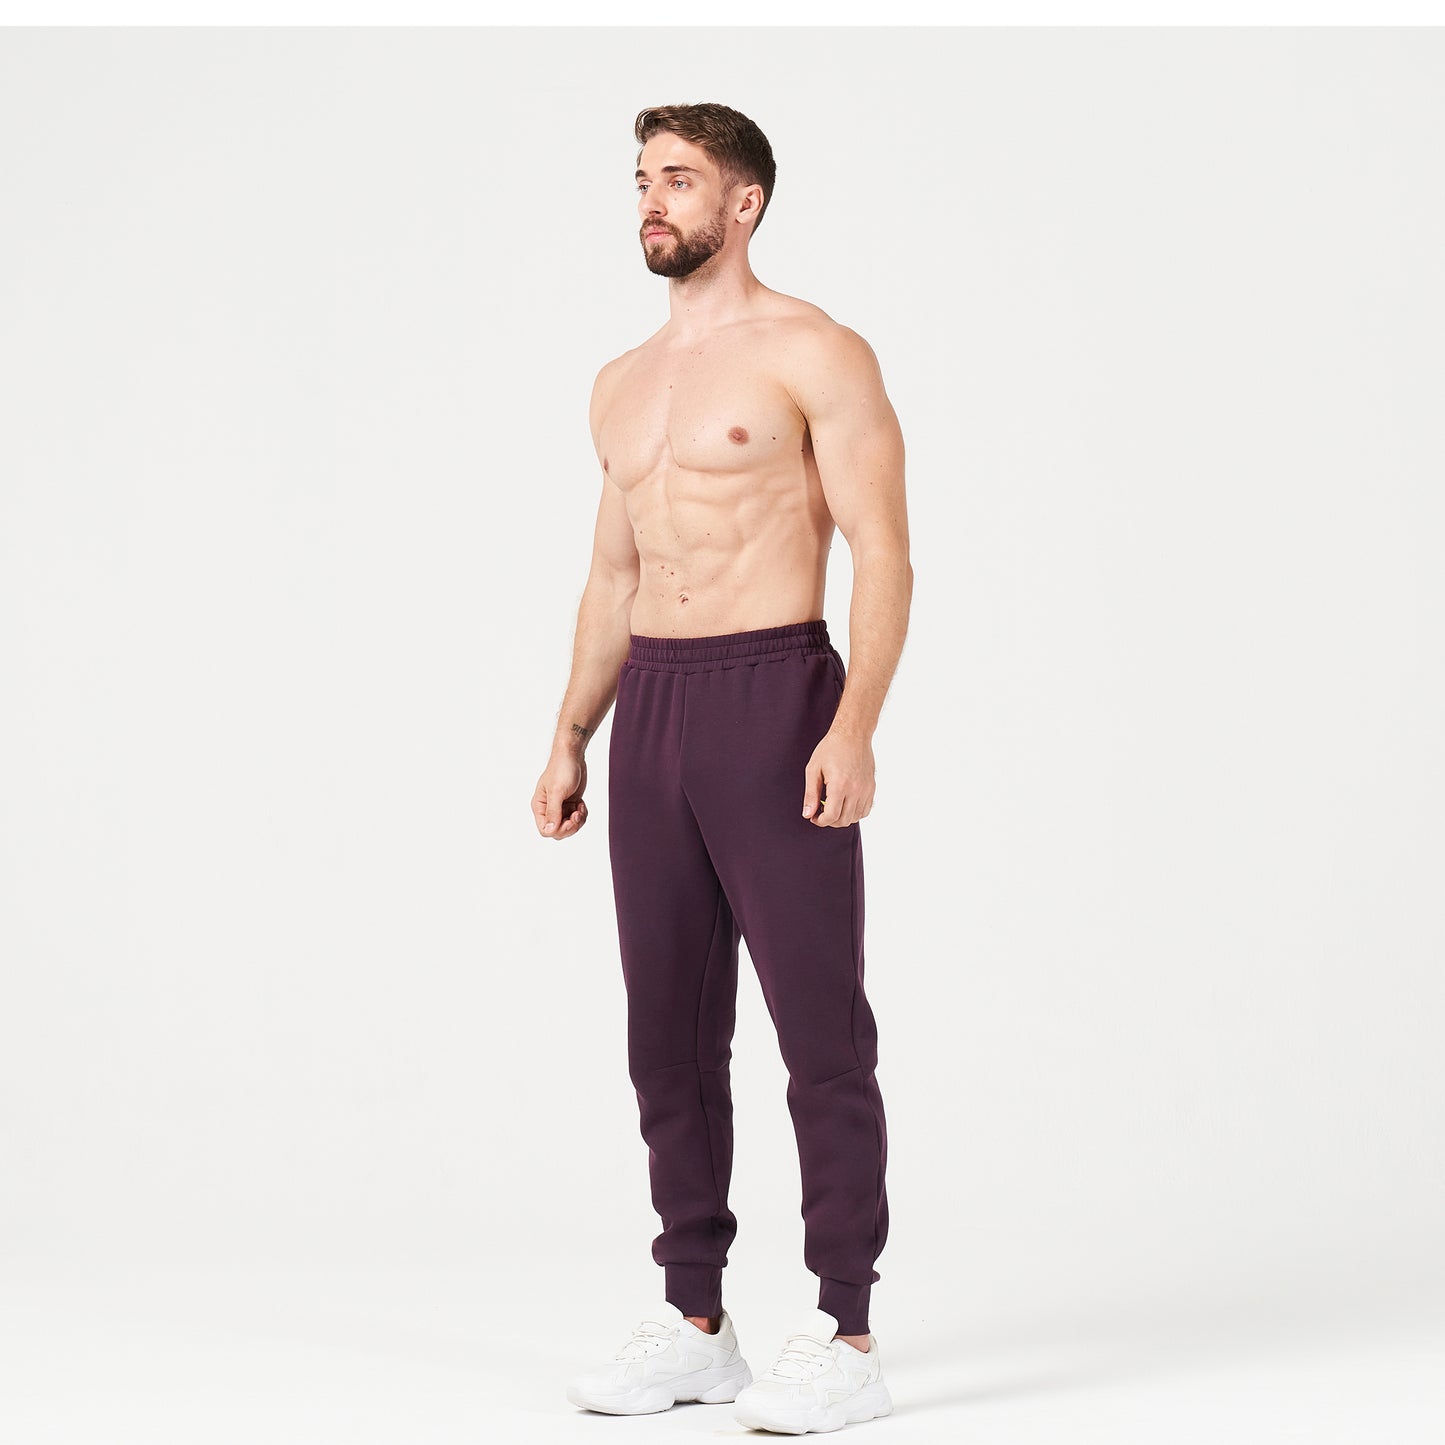 squatwolf-gym-wear-lab360-drylite-joggers-plum-perfect-workout-pants-for-men